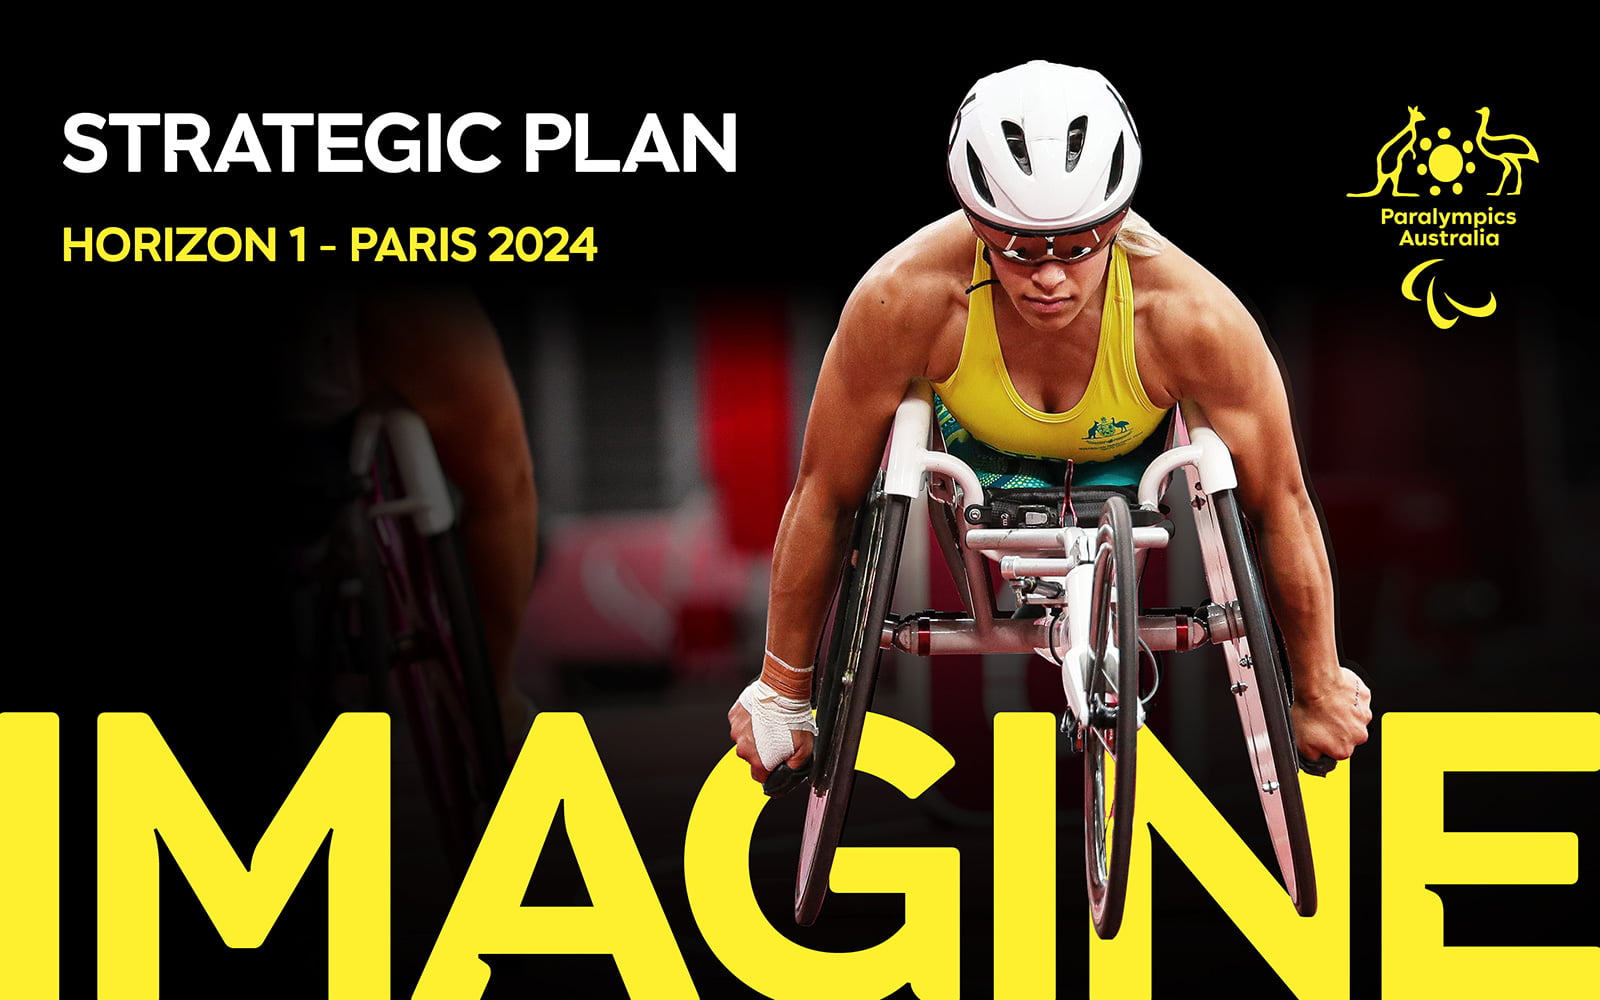 ‘A Powerful Legacy’: Paralympics Australia Releases Landmark Sporting And Social Masterplan